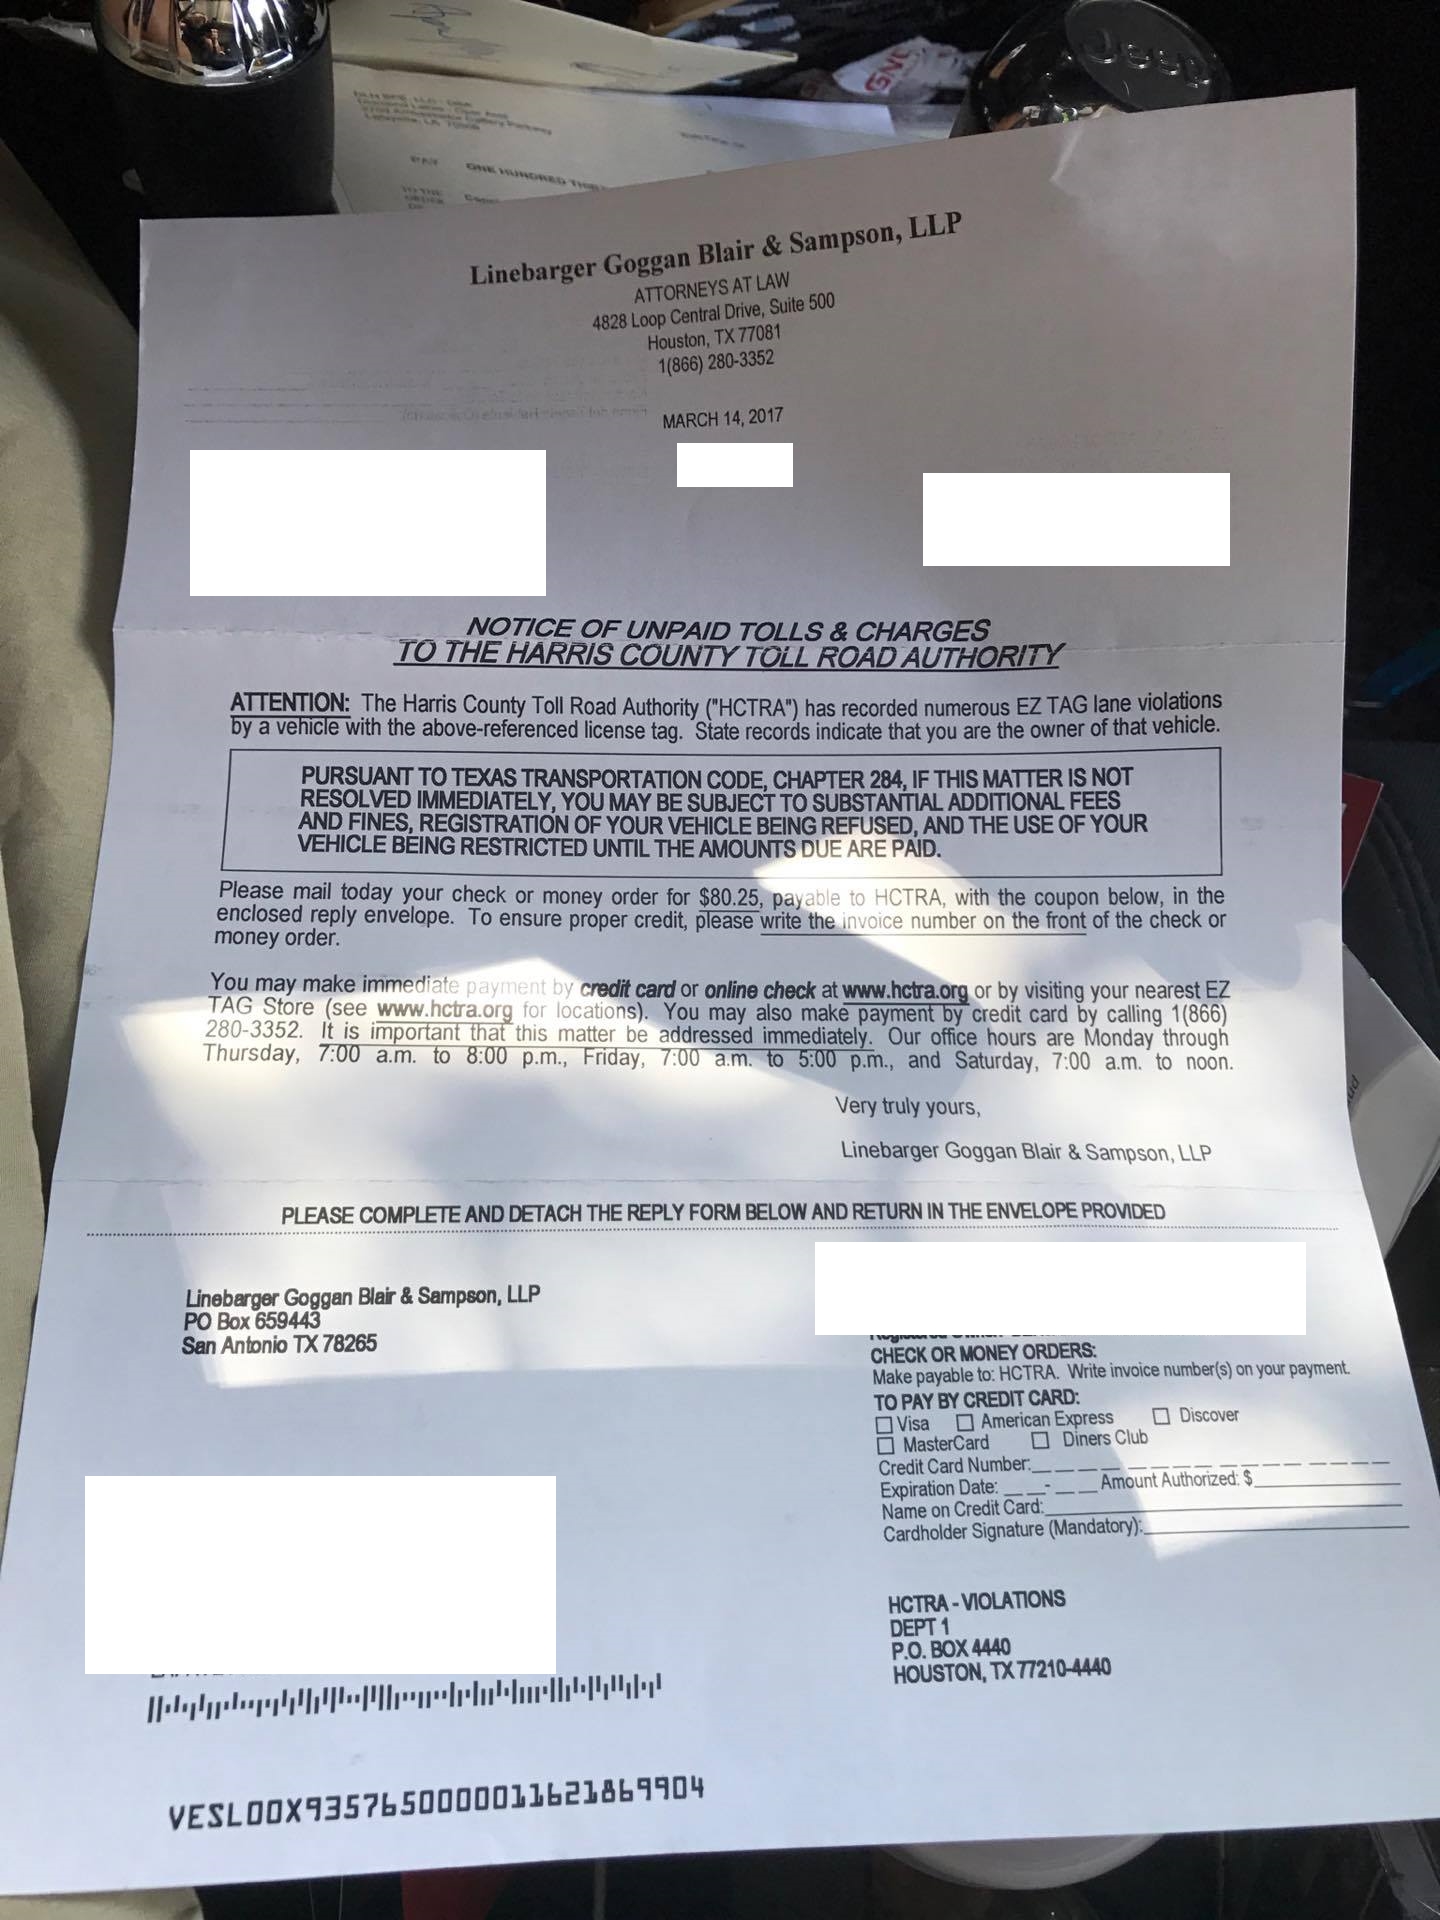 I've removed address information and any additional personal information. The only reason I received this notice is because I was finally able to get to the post office and change my address.